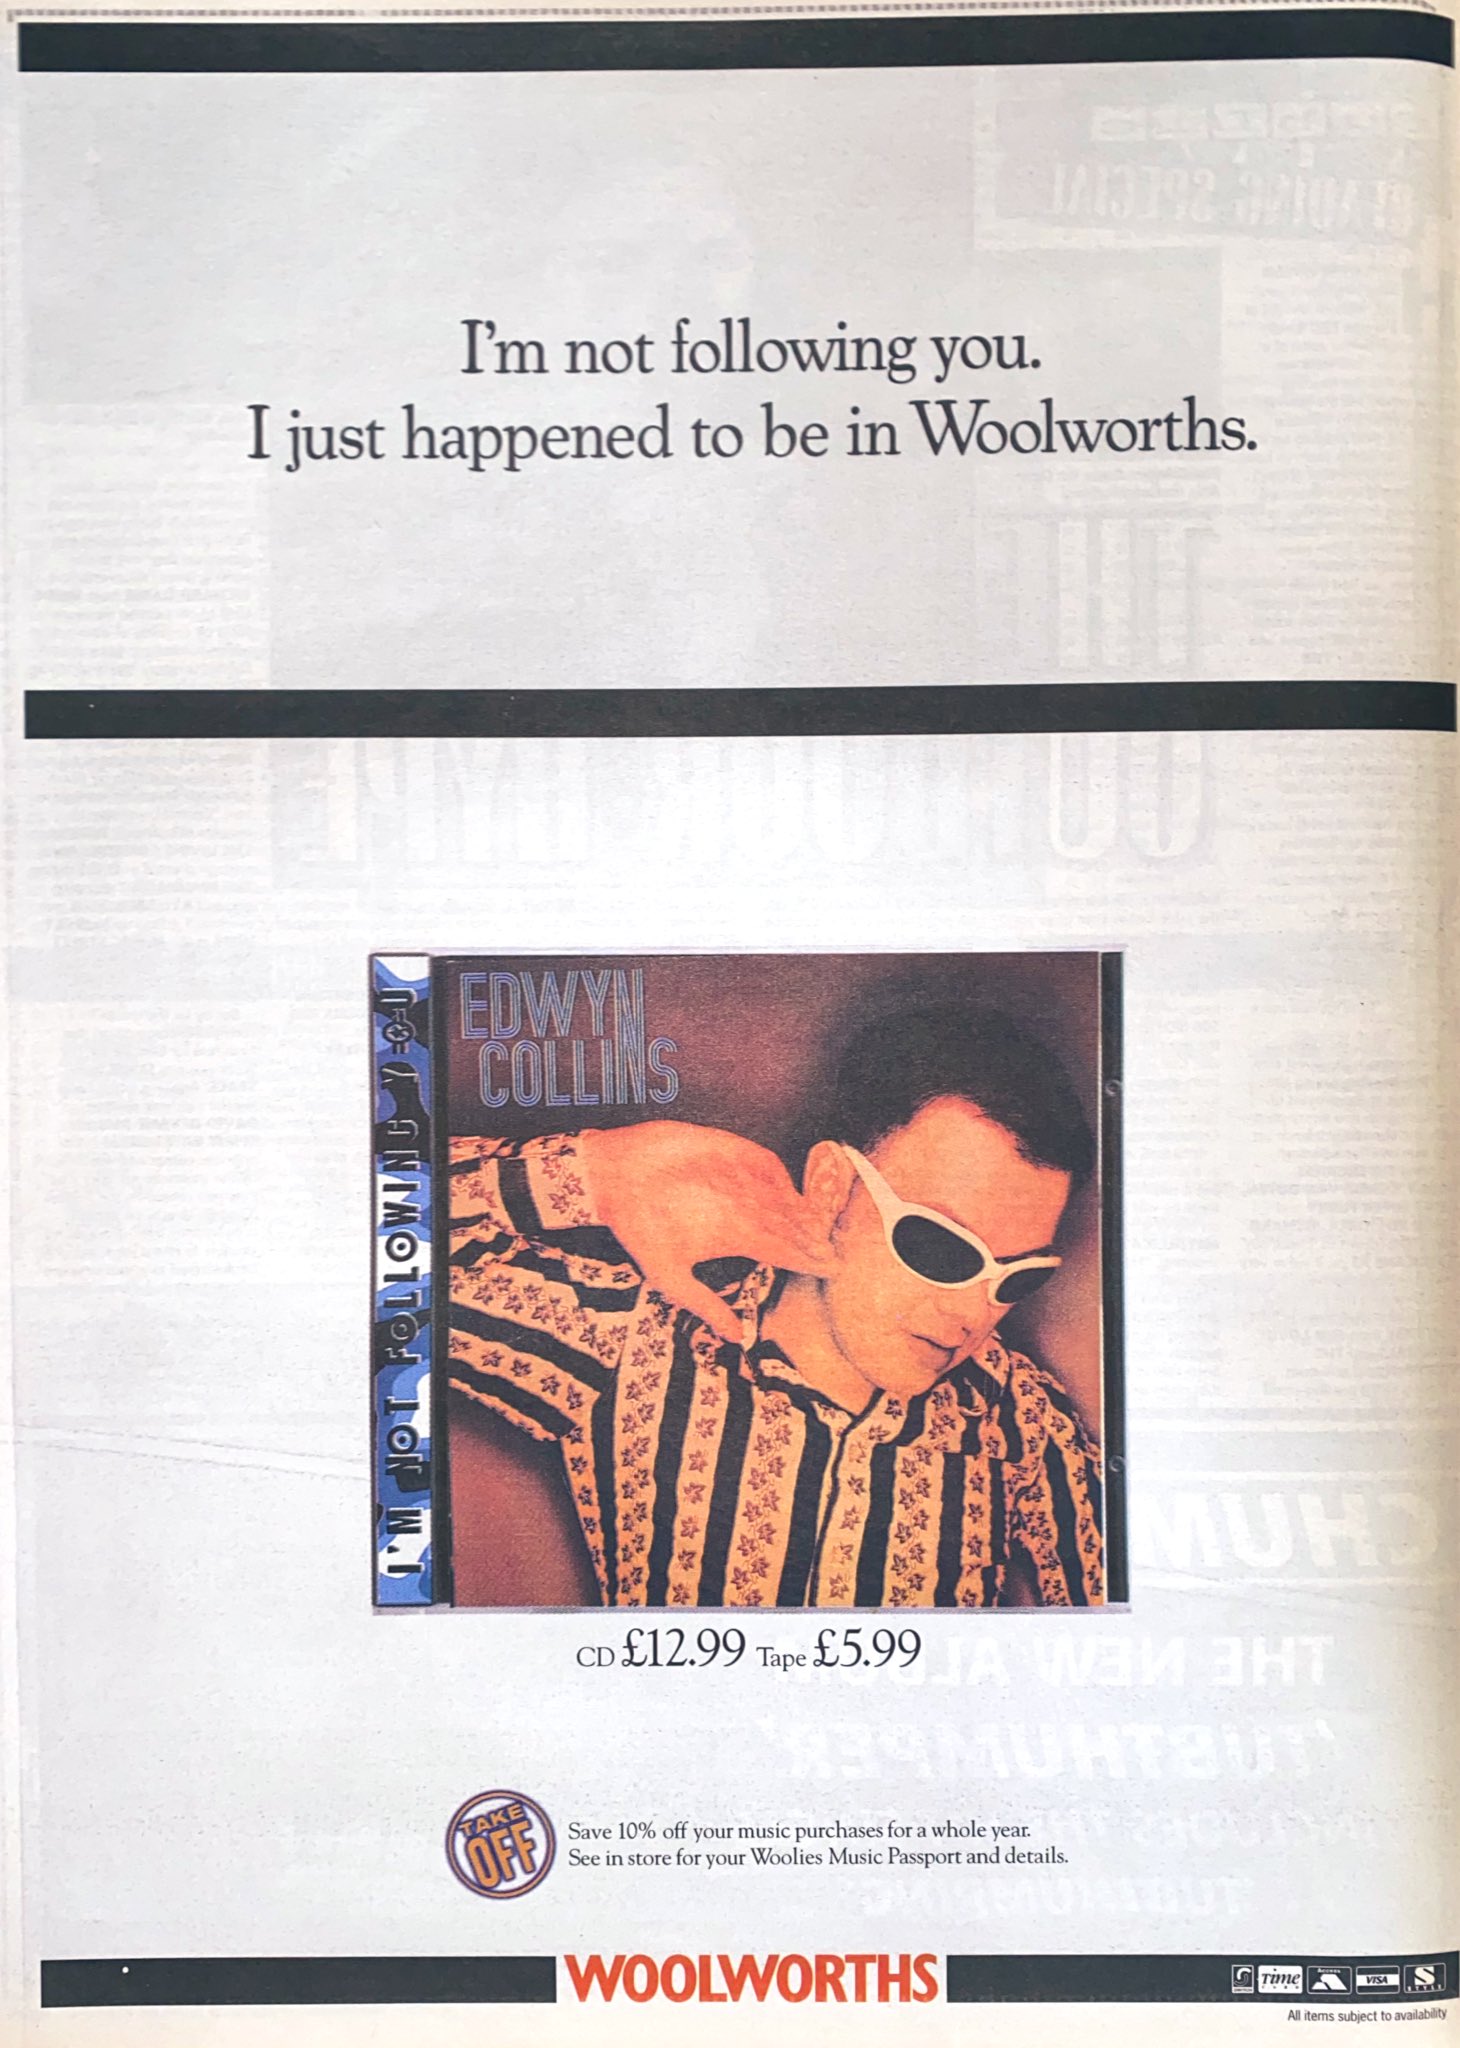 Happy 25th birthday to \"I\m Not Following You\" by Edwyn Collins.

Who\s got a copy of this album? 